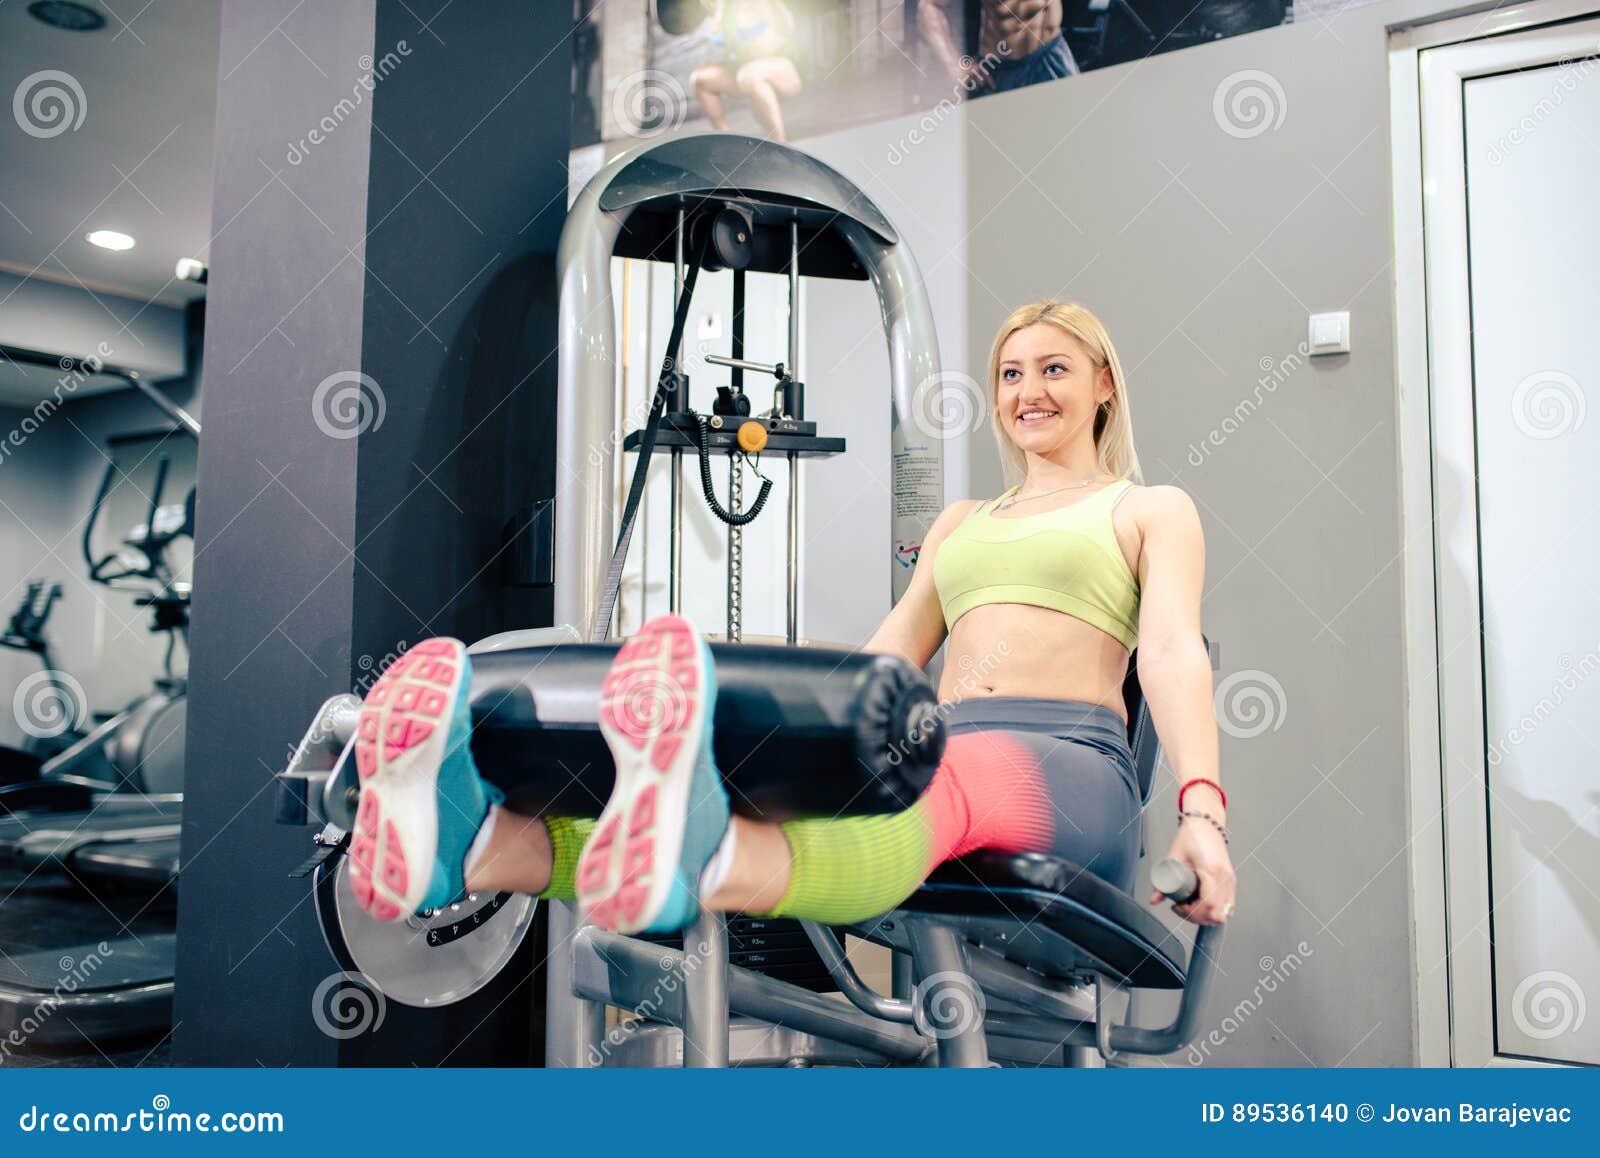 Blonde At Gym Stock Photo Image Of Club Equipment Beauty